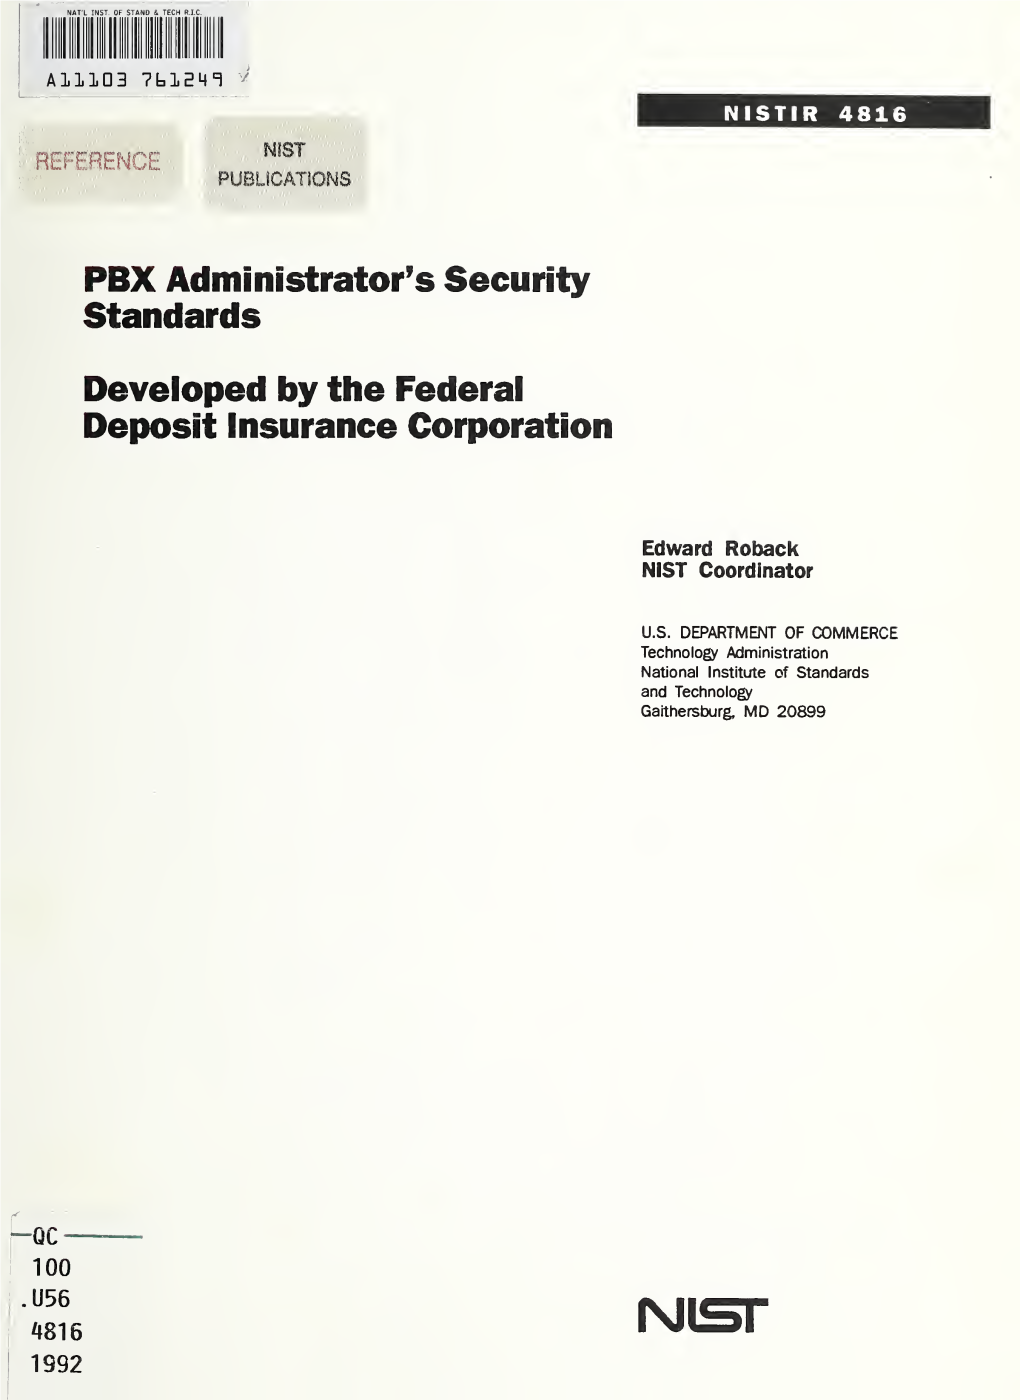 PBX Administrator's Security Standards